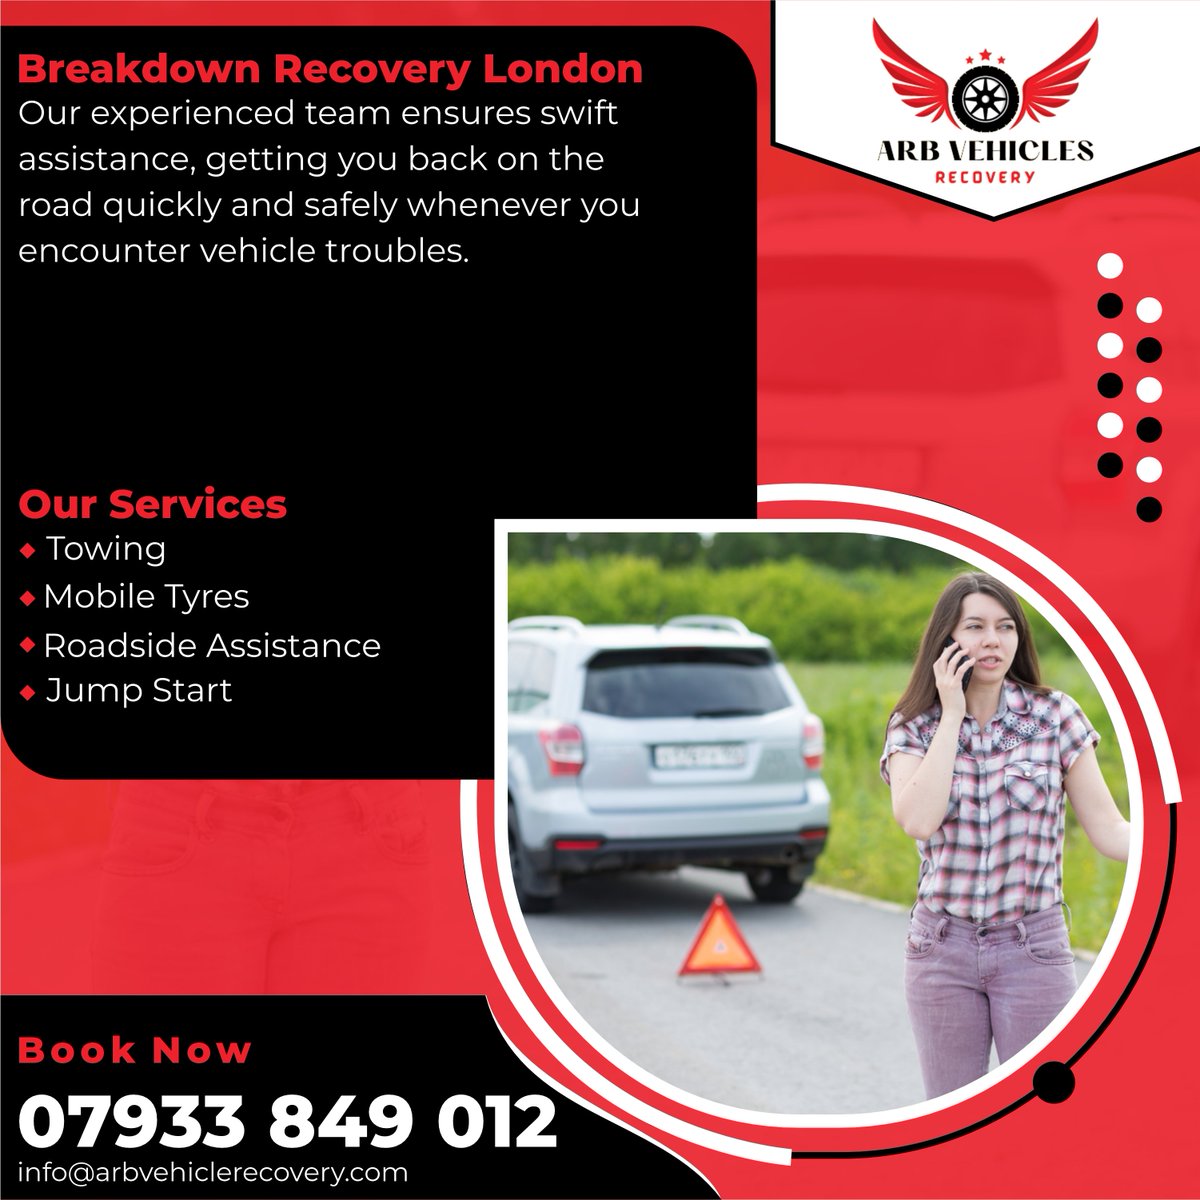 ARB Vehicle Recovery offers reliable breakdown recovery services in London. With our expertise, we ensure prompt assistance to get you back on the road swiftly.

arbvehiclerecovery.co.uk
#BreakdownRecovery 
#LondonRecovery 
#RoadsideAssistance 
#EmergencyRecovery 
#VehicleRescue